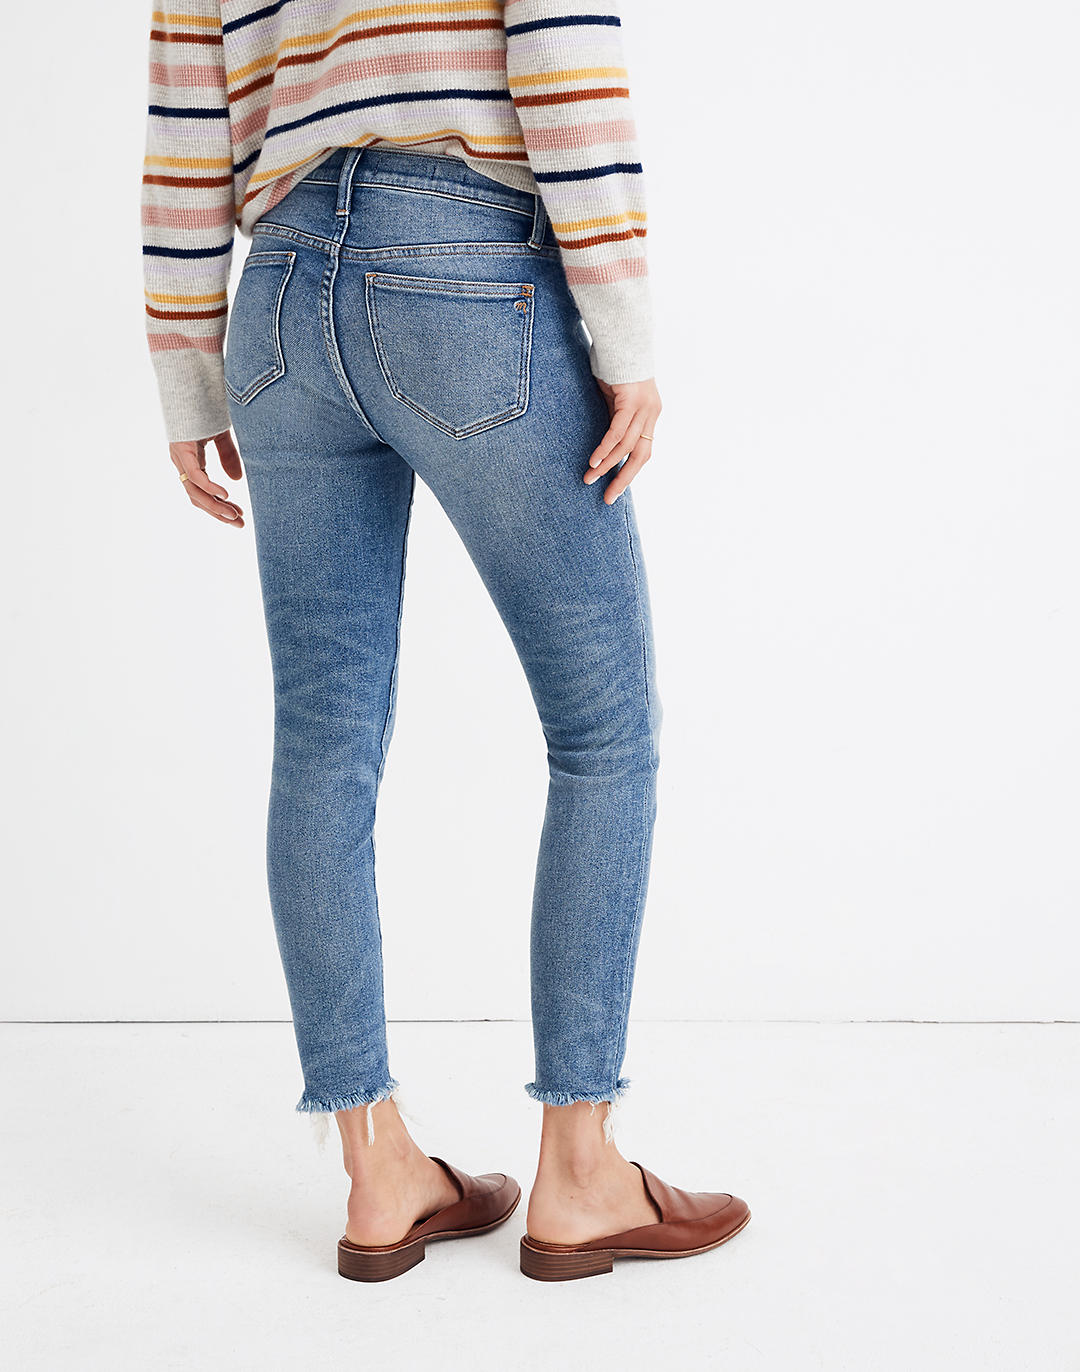 Maternity Side-Panel Skinny Jeans in Cordova Wash: Adjustable Edition